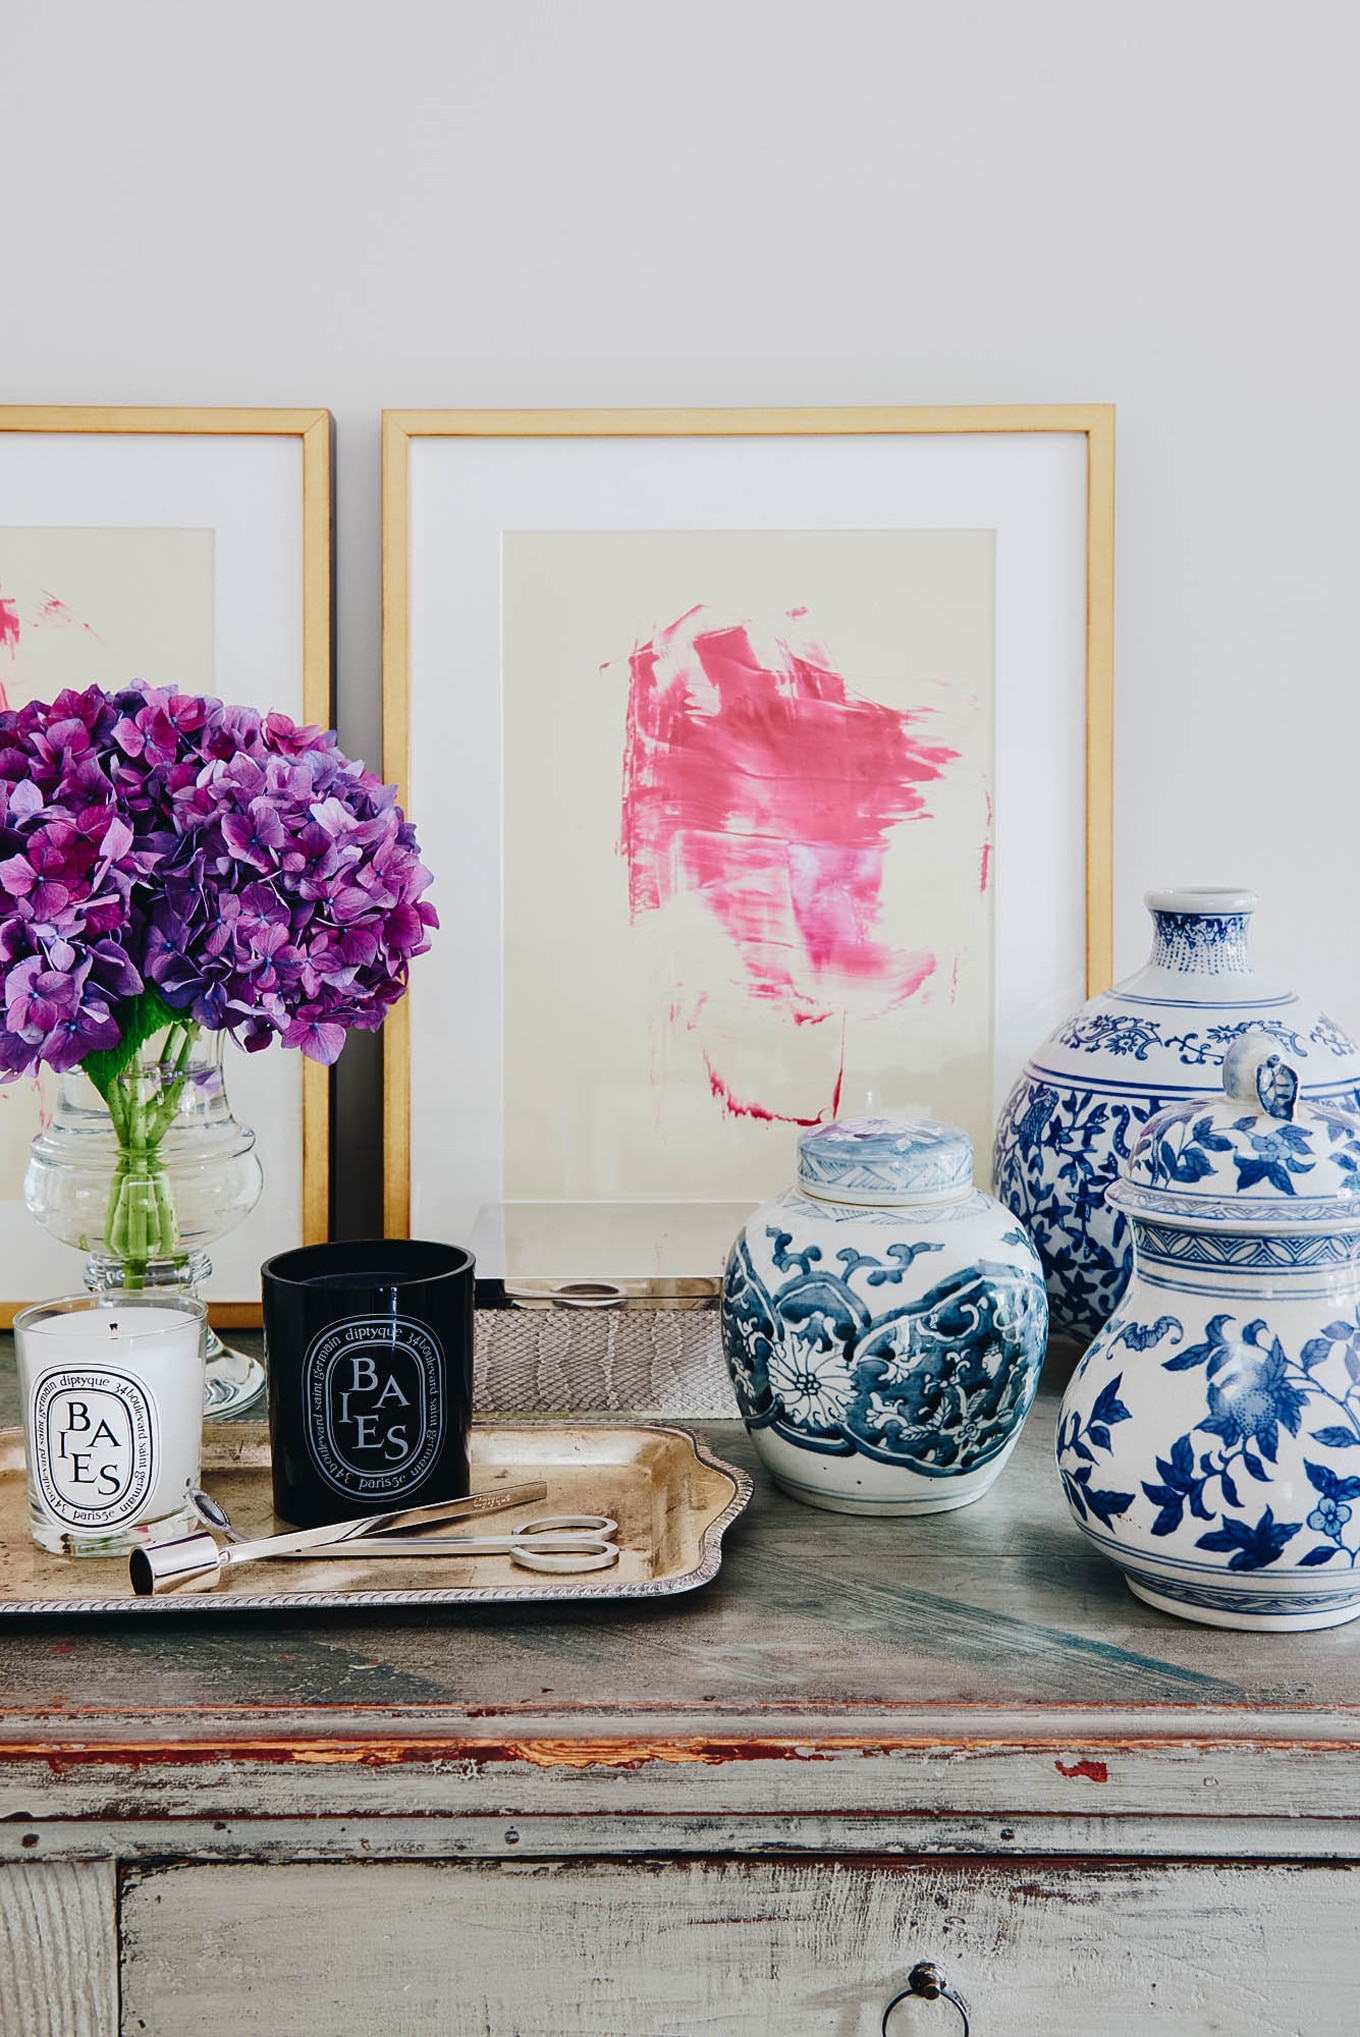 collected art, candles and blue and white jars | hacienda house tour on coco kelley